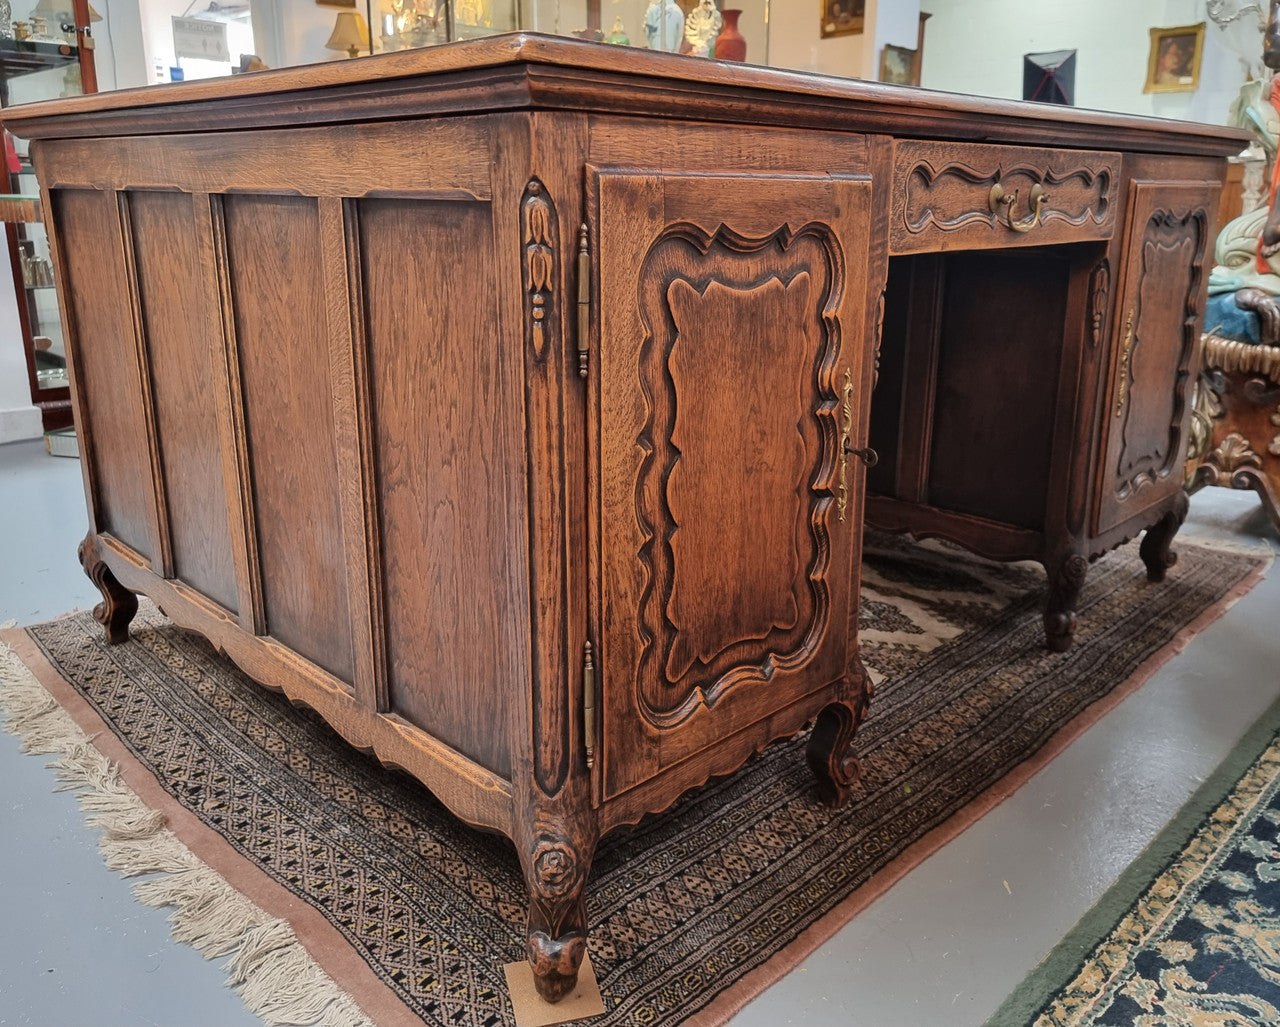 Fabulous Louis XV style French Oak beautifully carved full partners desk. Both sides have a functioning drawer in the middle and two cupboards either side. On both sides one cupboard door opens up to four smaller internal drawers. Plenty of storage space and a large top surface to work on. It is in good original detailed condition.